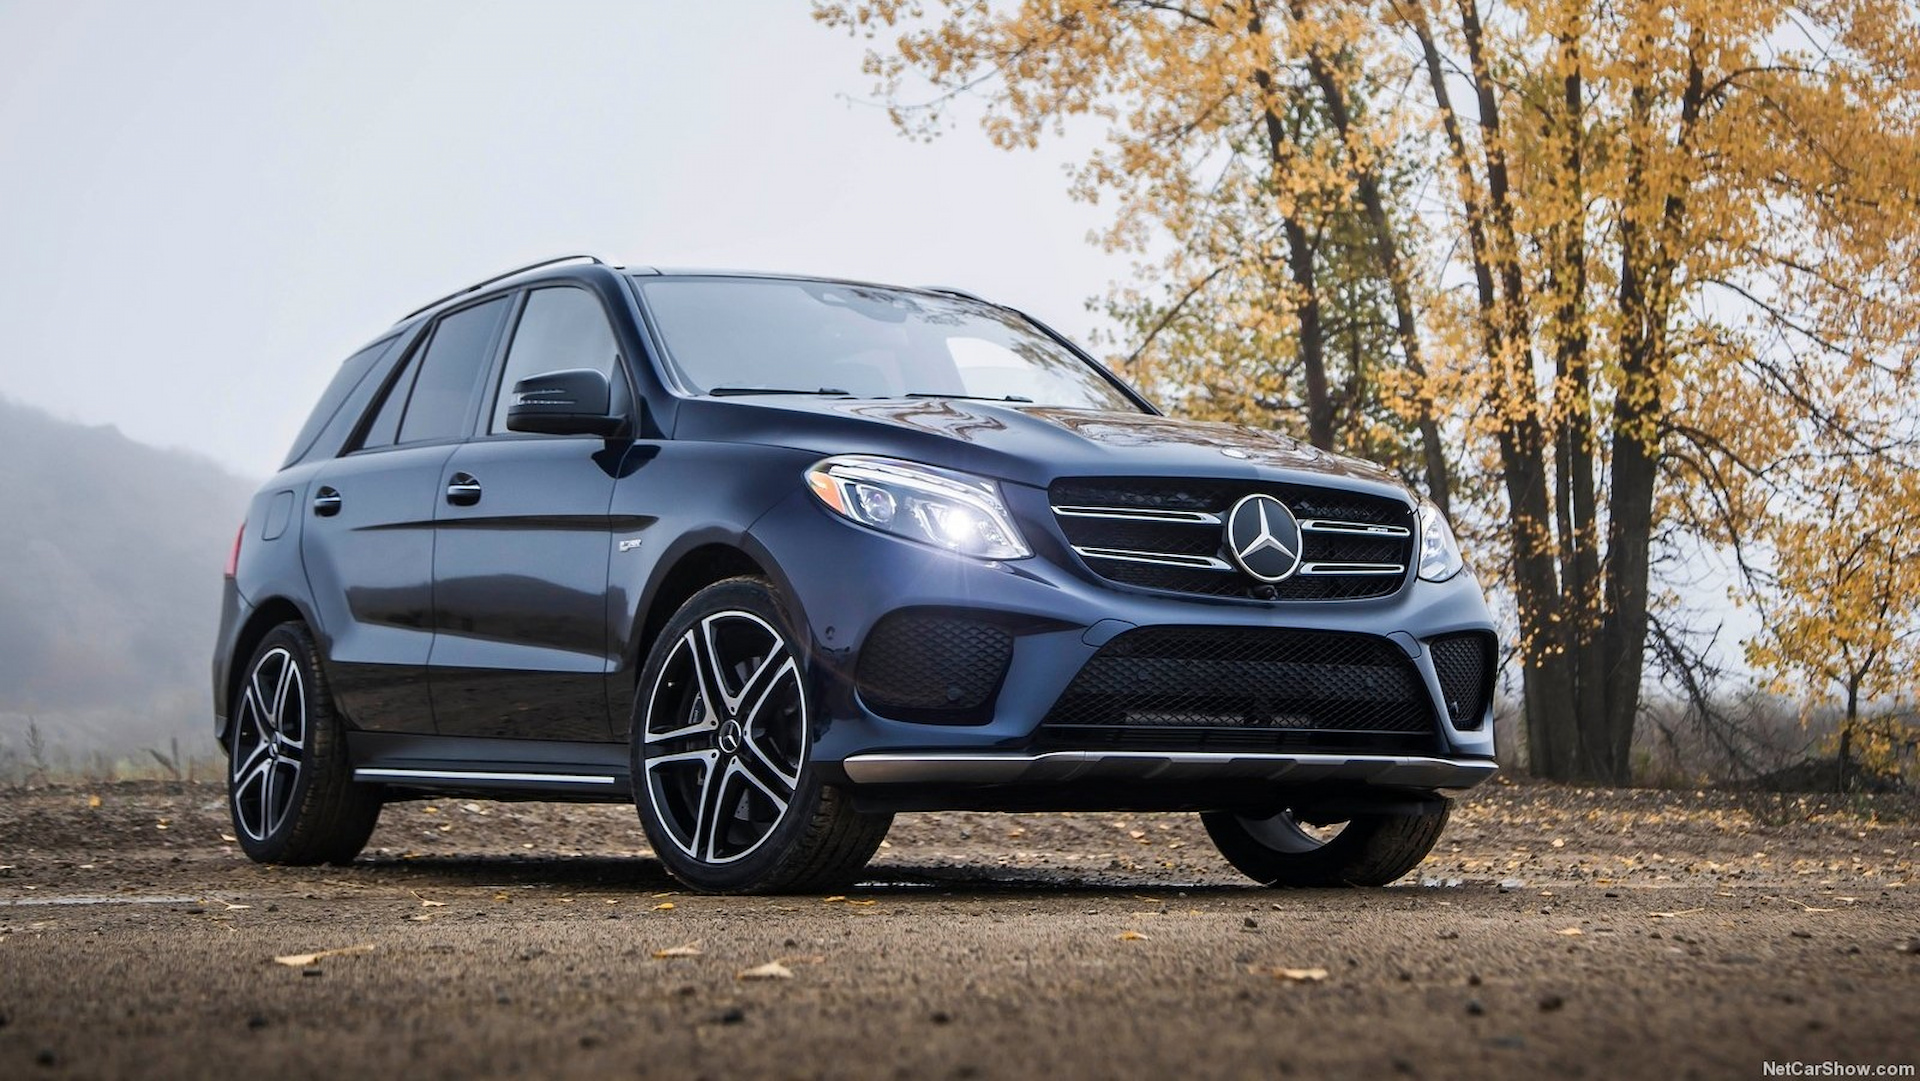 The Definitive Guide To Mercedes-Benz W166 ML/GLE Suspension & Brakes